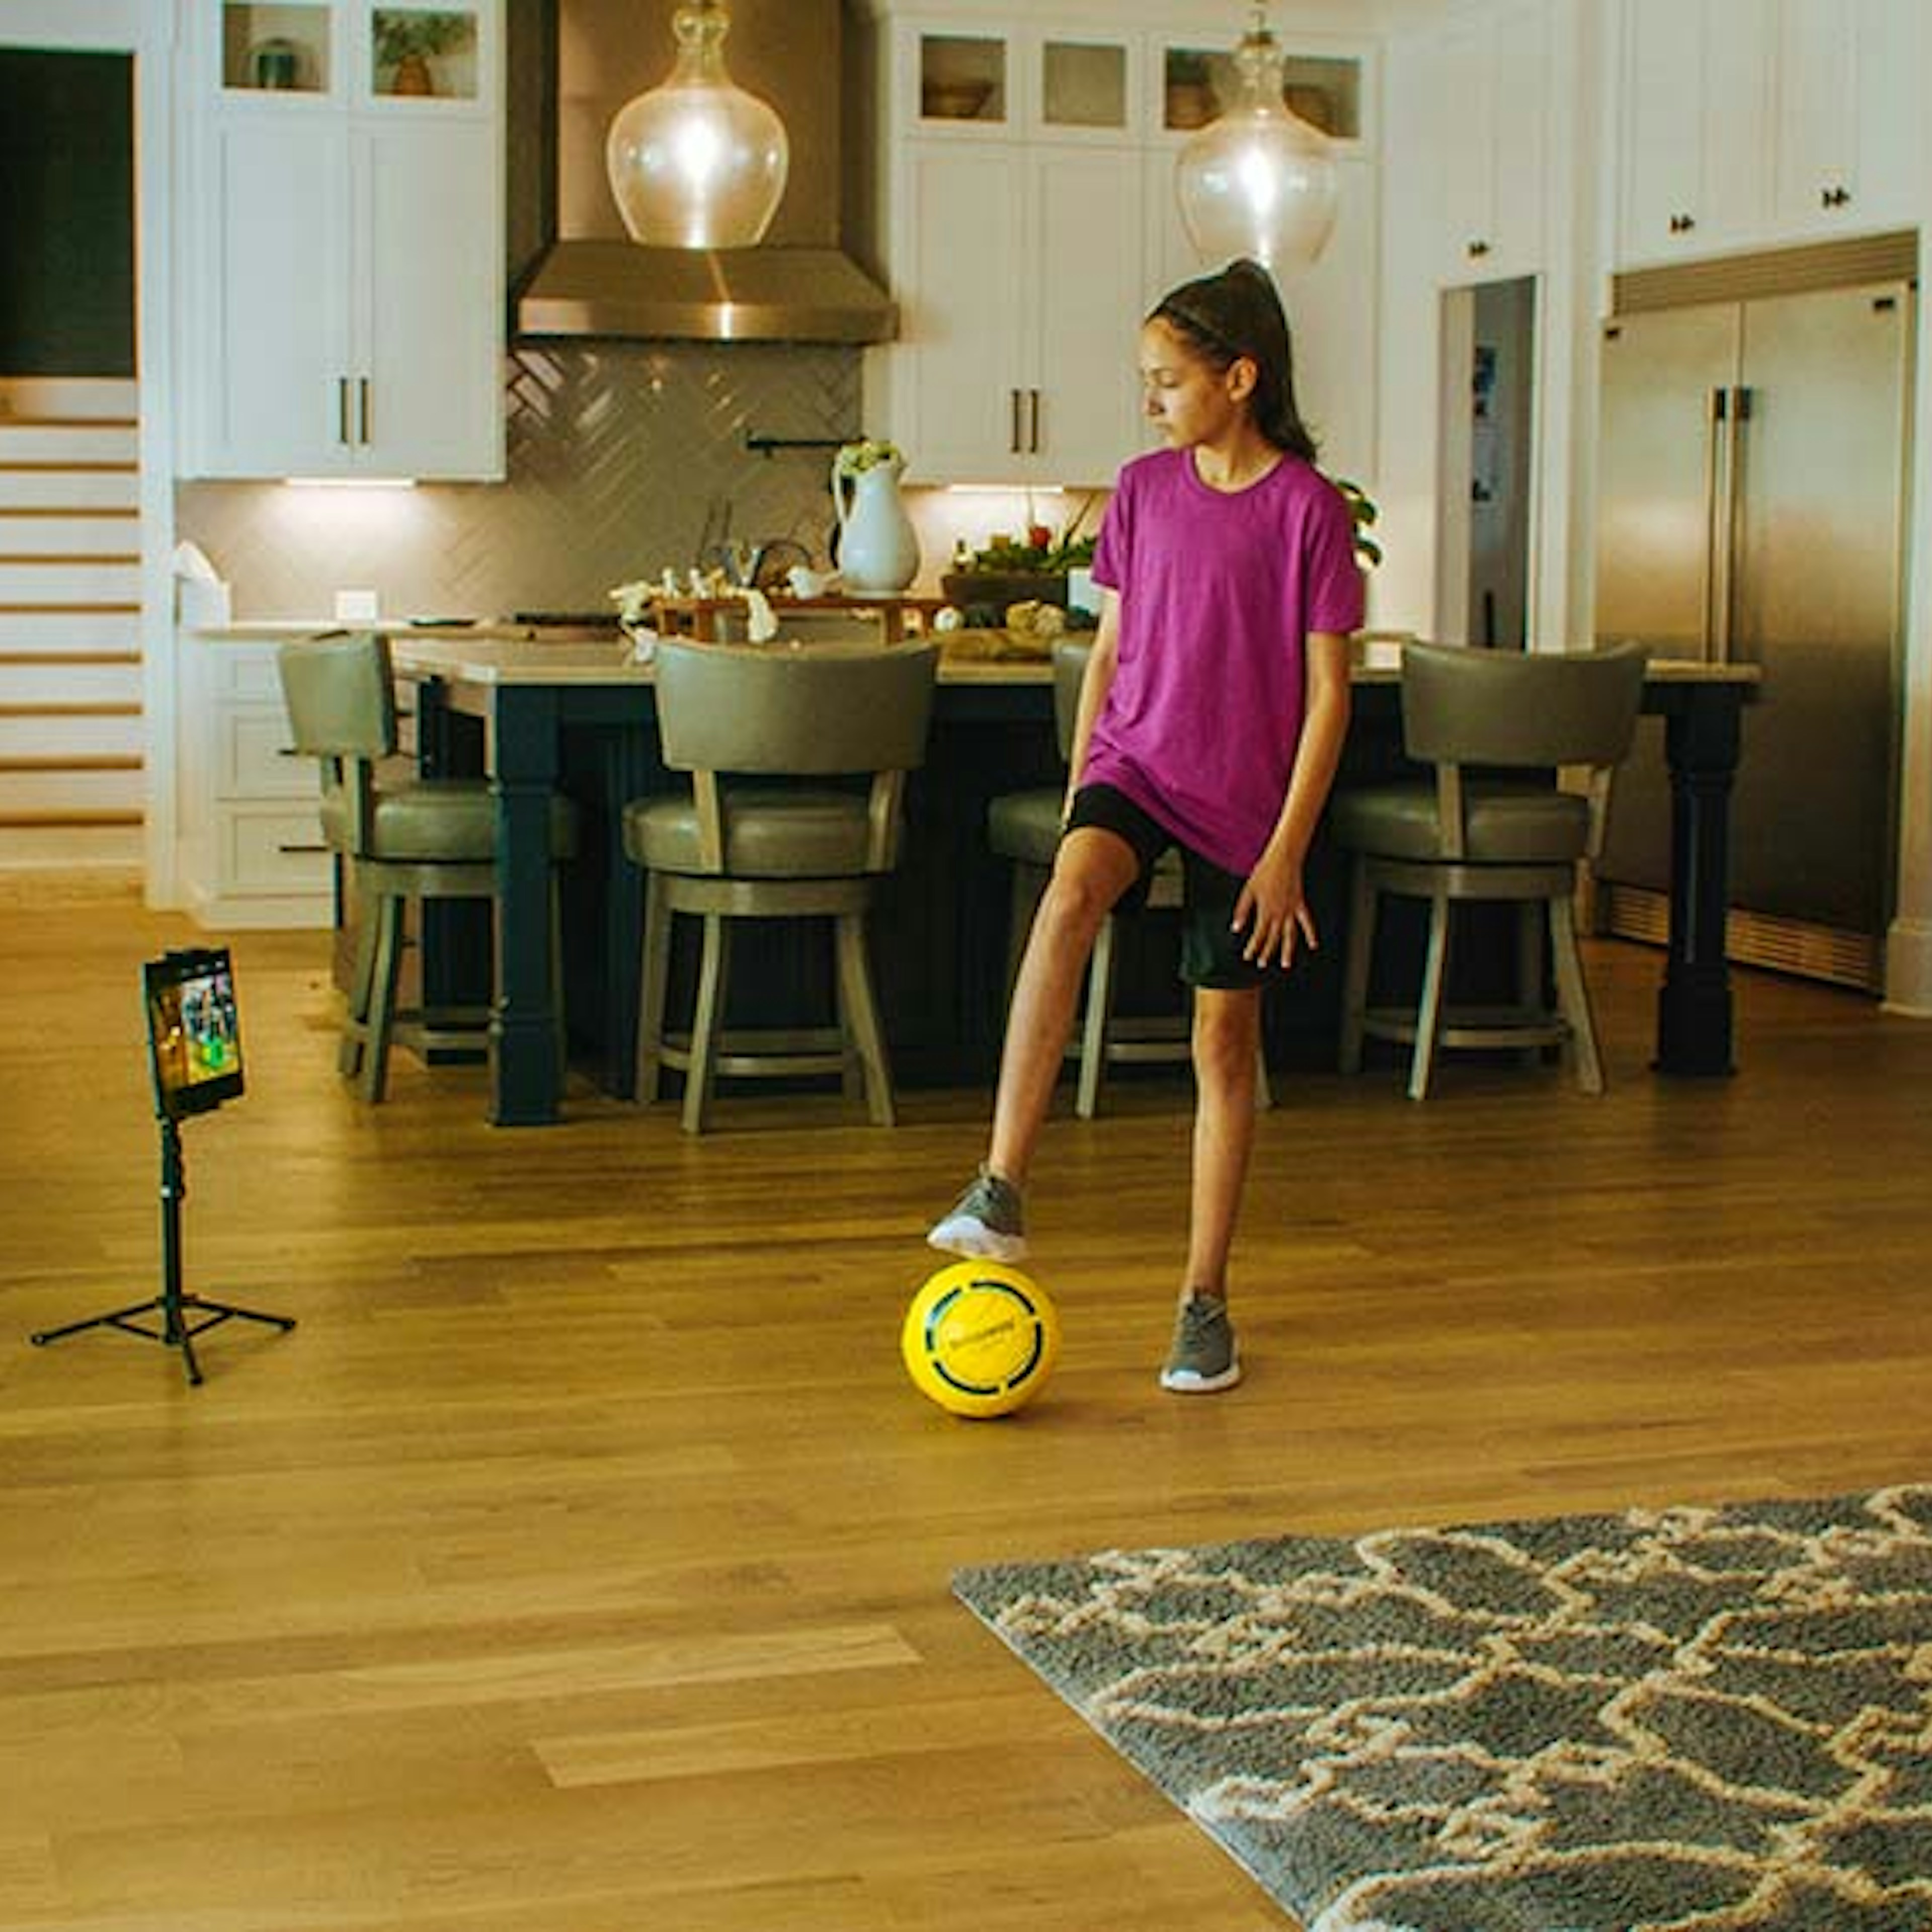 What is a Smart Soccer Ball? Learn more about what makes this ball 'SMART'!